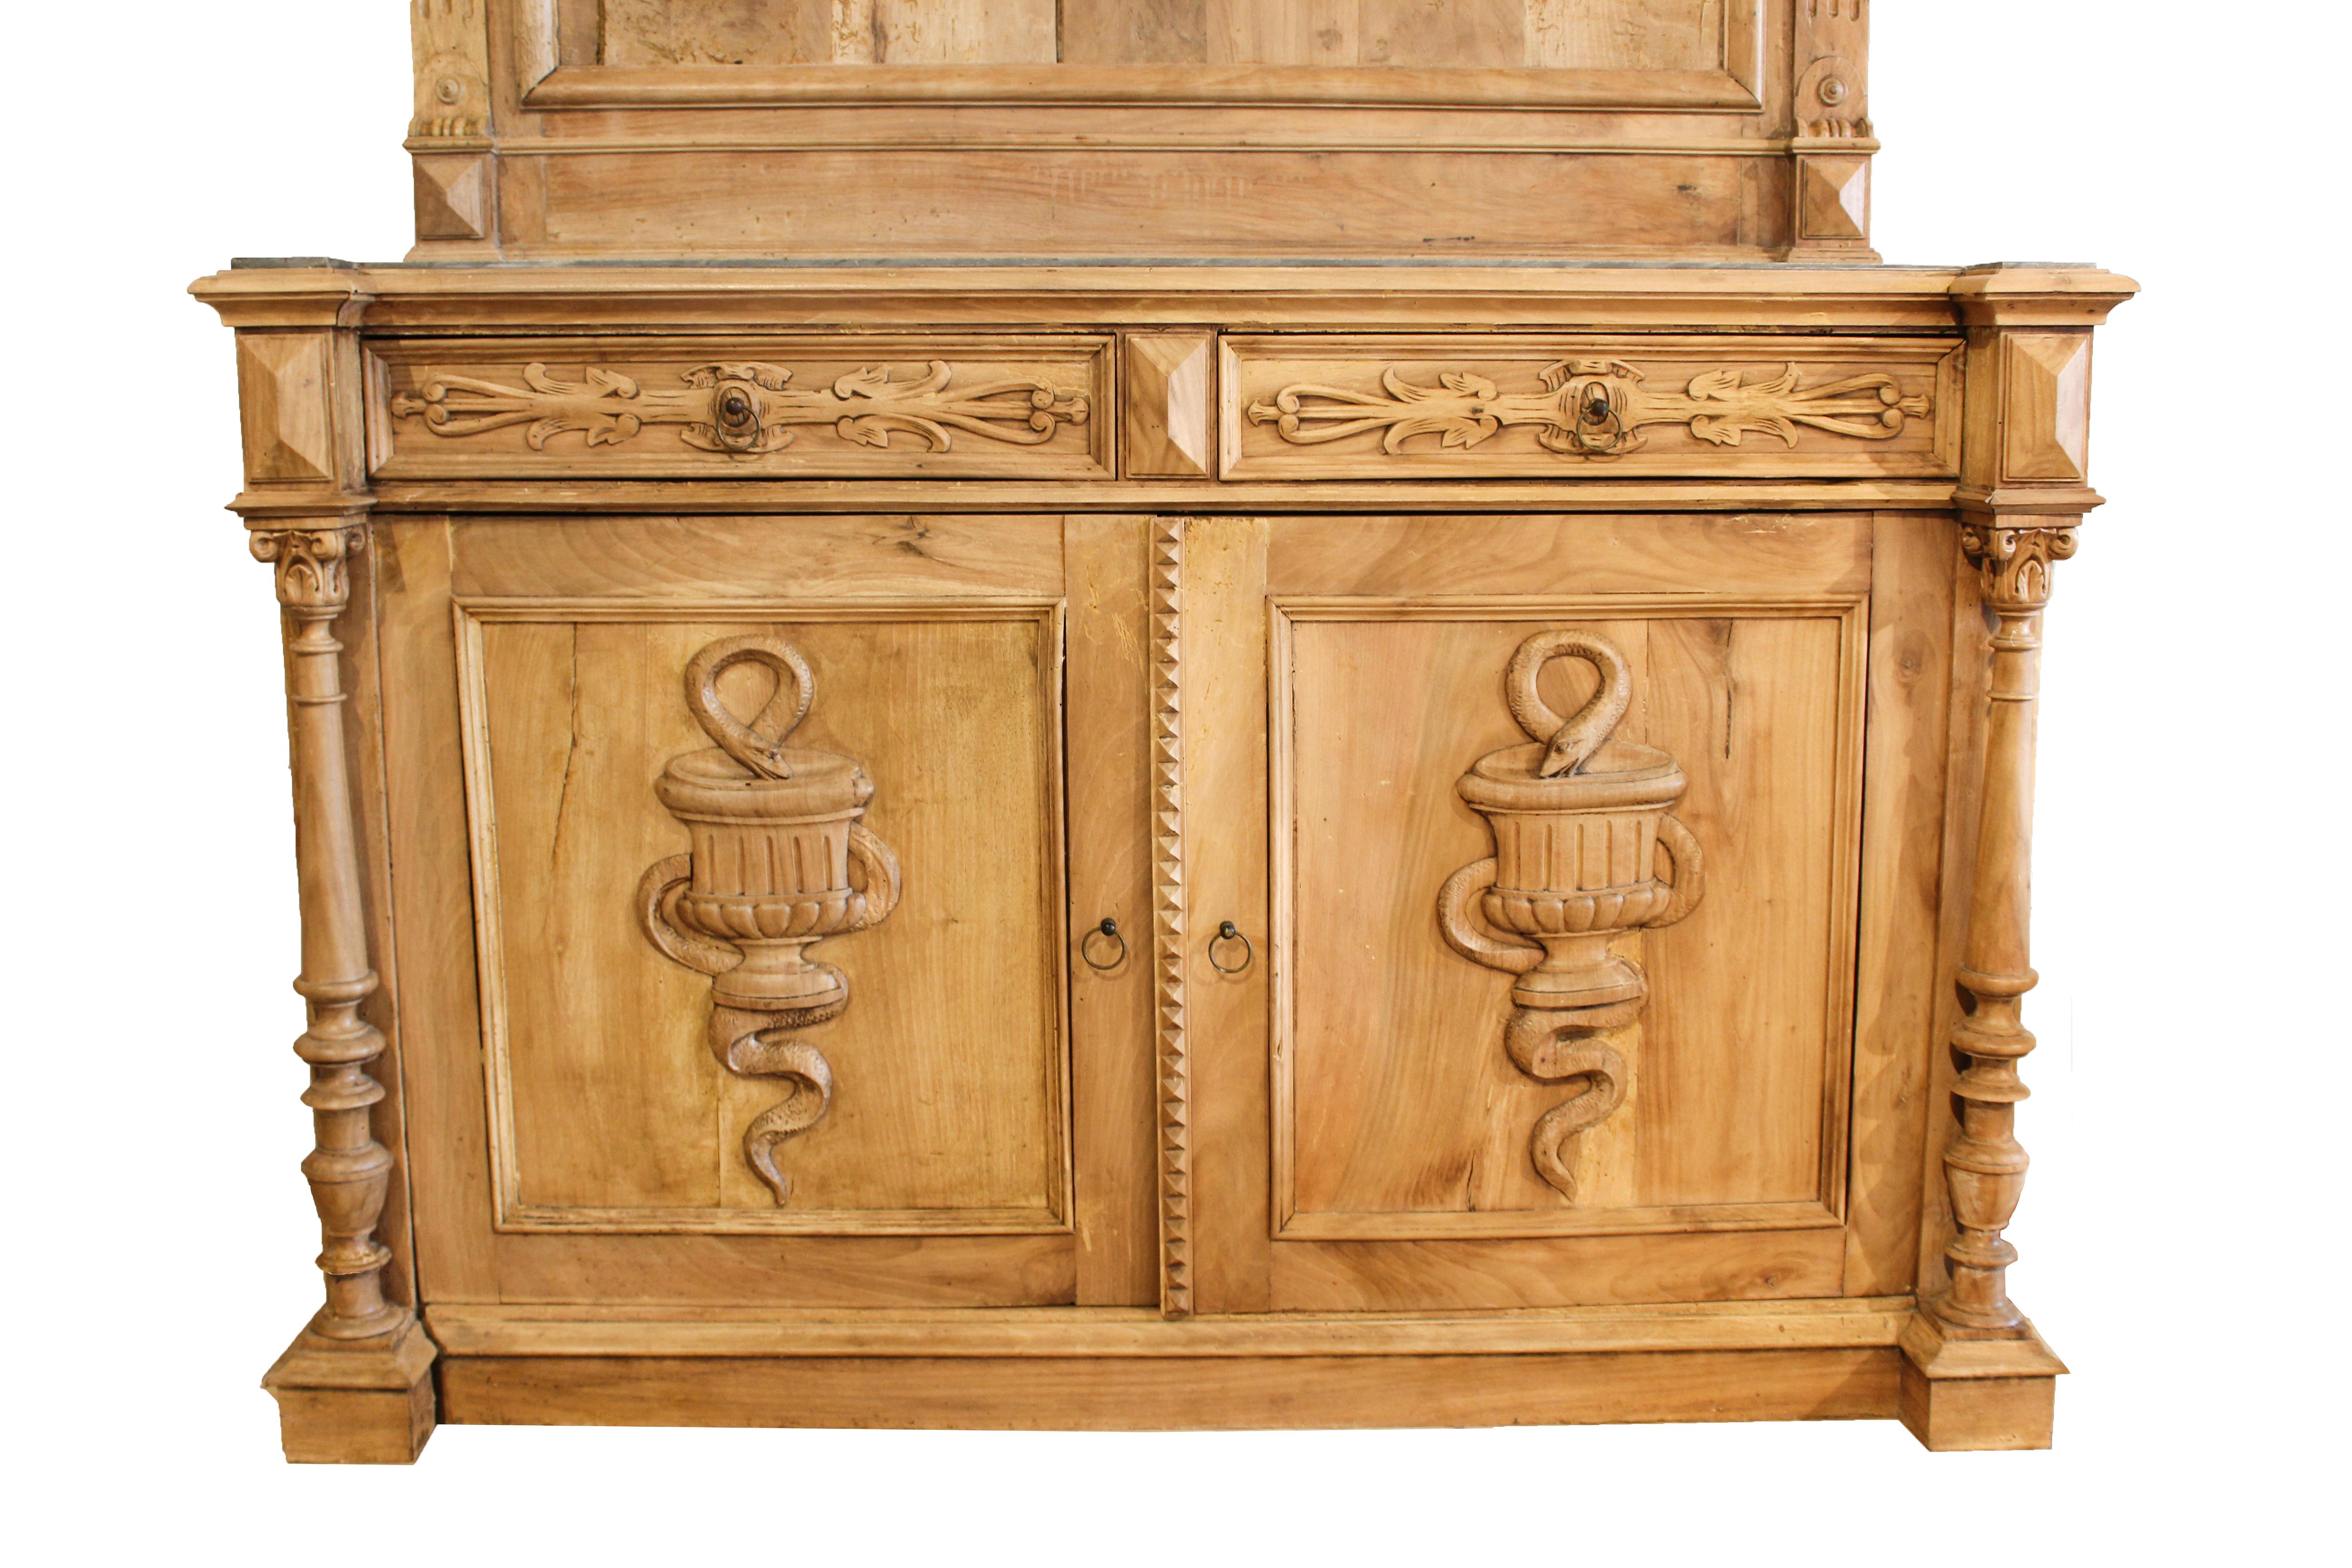 Pair of bookcase cabinets.
Made with walnut.
Very decorative piece with elephants carved in the wood.
Three shelves made with glass.
Very rare piece.
Provenance: comes from a pharmacy in France.
Circa 1860, France.